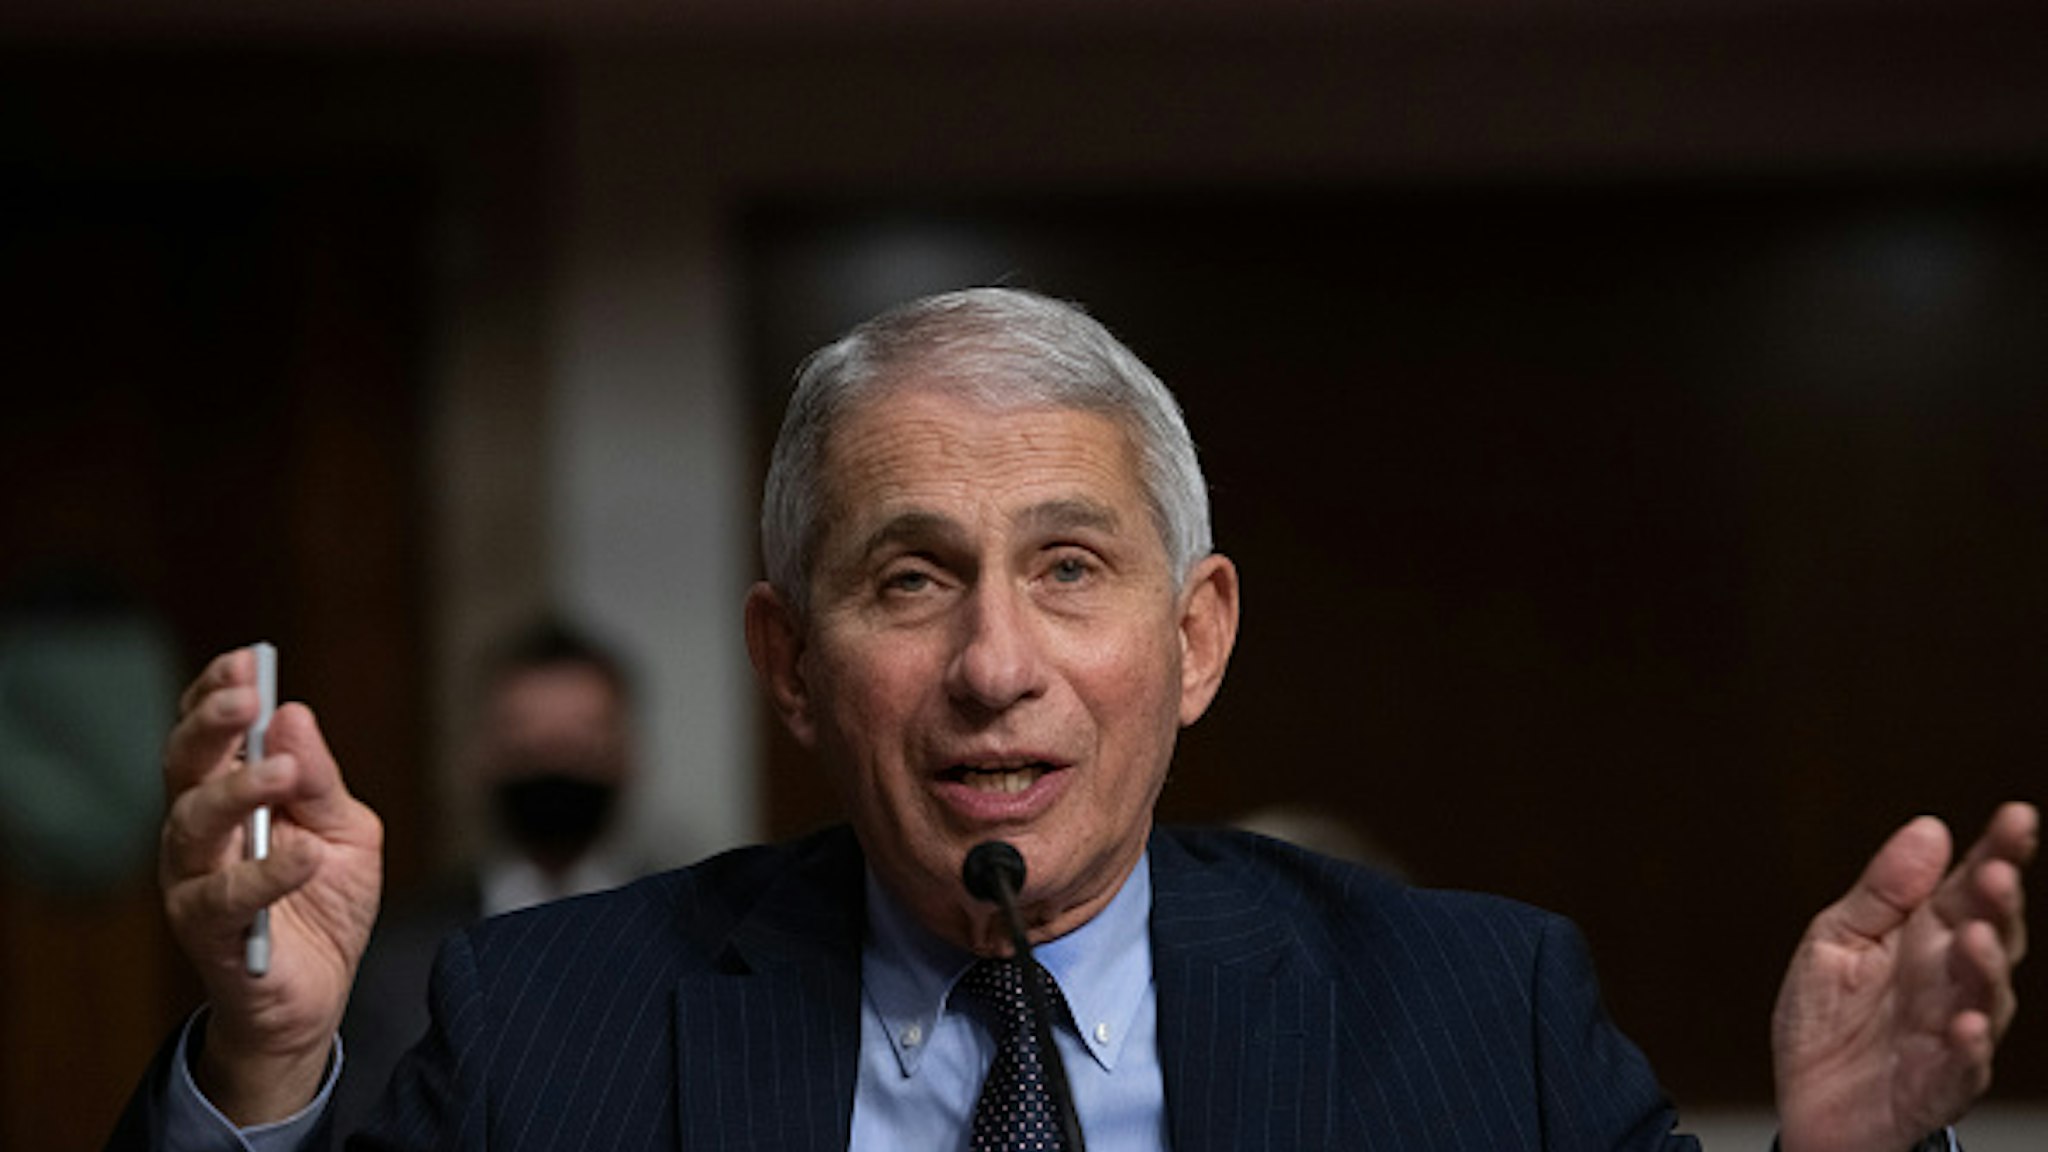 Anthony Fauci, director of the National Institute of Allergy and Infectious Diseases, speaks during a Senate Health Education Labor and Pensions Committee hearing in Washington, D.C., U.S., on Wednesday, Sept. 23, 2020. The U.S. death toll from the novel coronavirus exceeded 200,000 yesterday, a grim milestone that comes eight months after the pathogen was first confirmed on American soil.